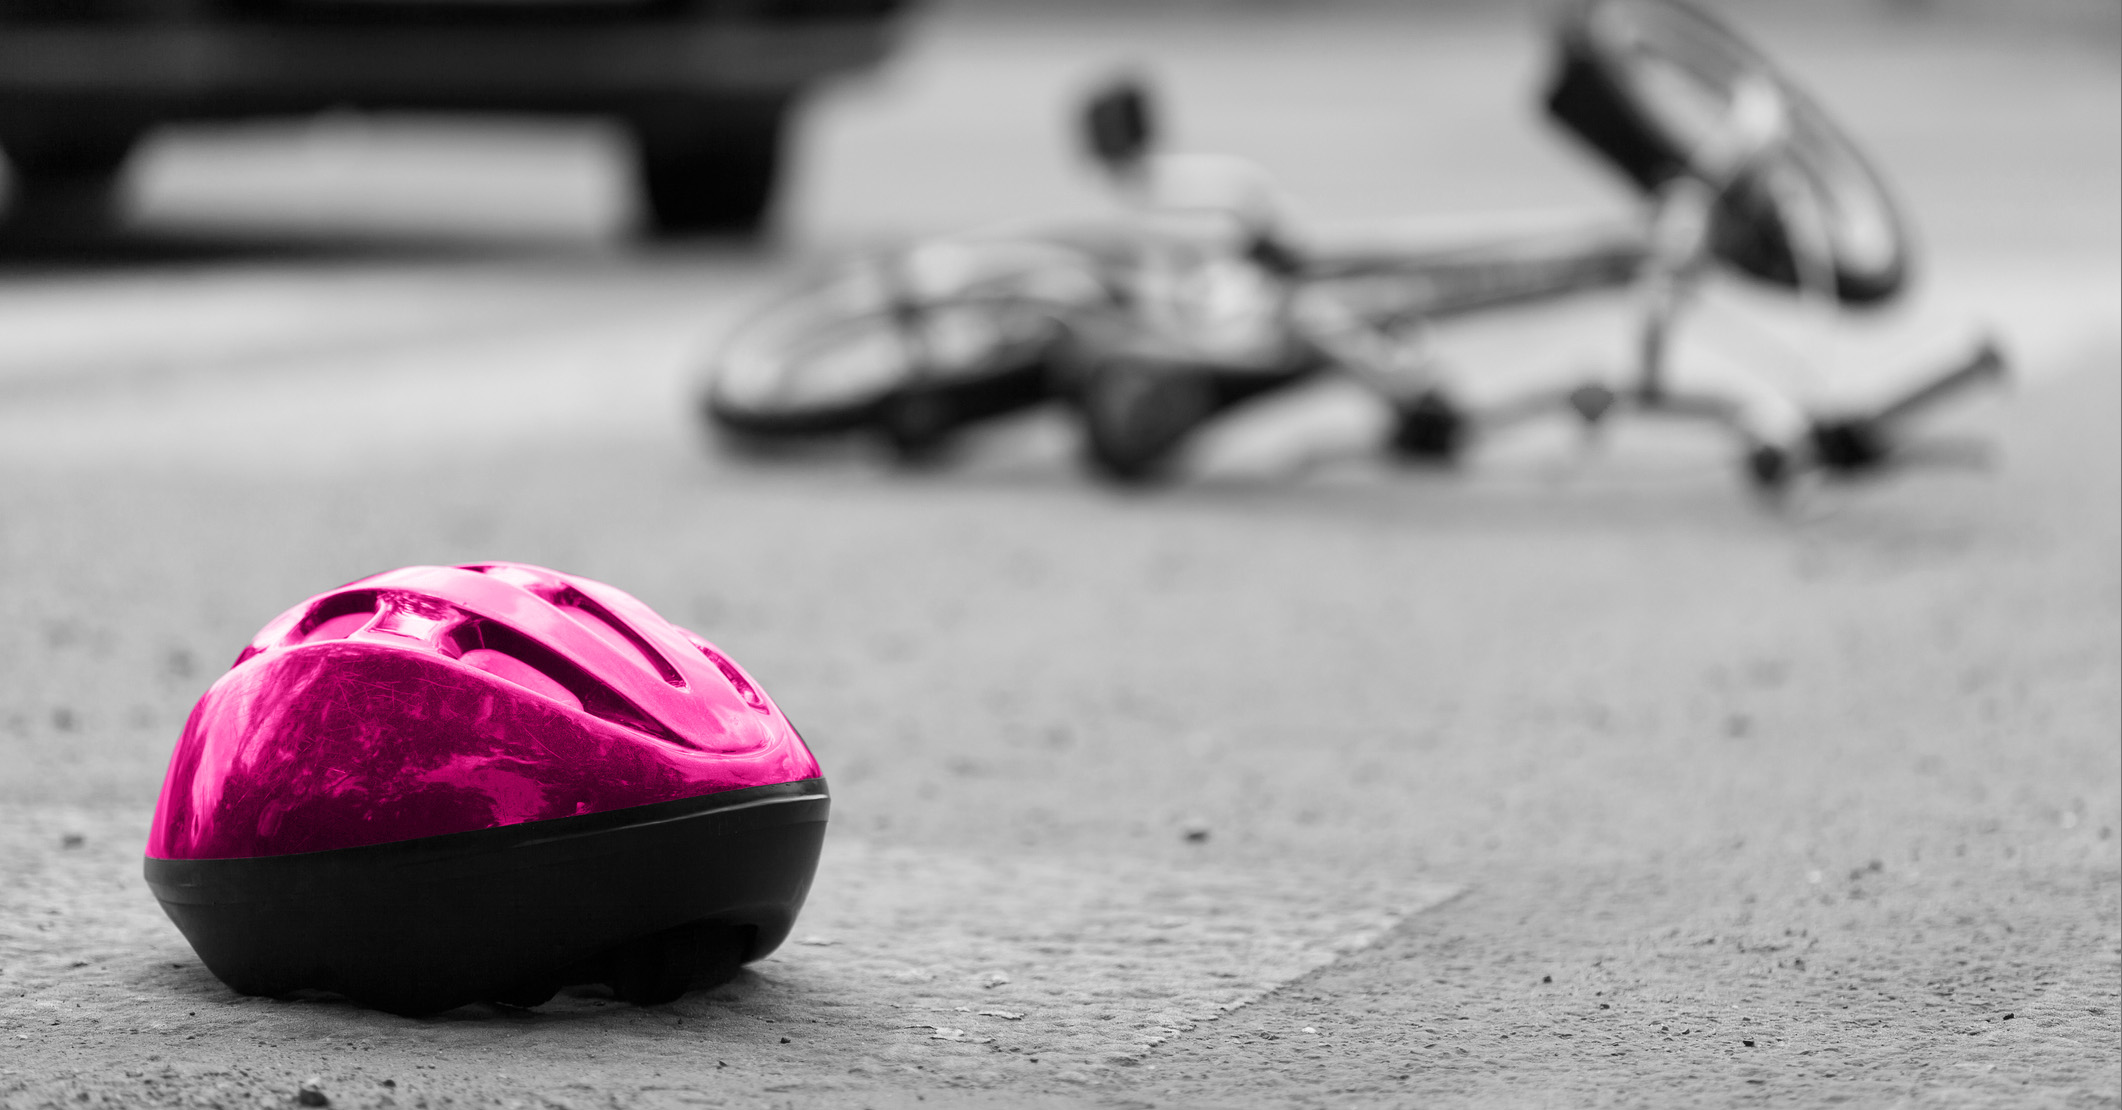 £4,000 injury settlement obtained for cyclist who fractured her wrist when hit by a car Image